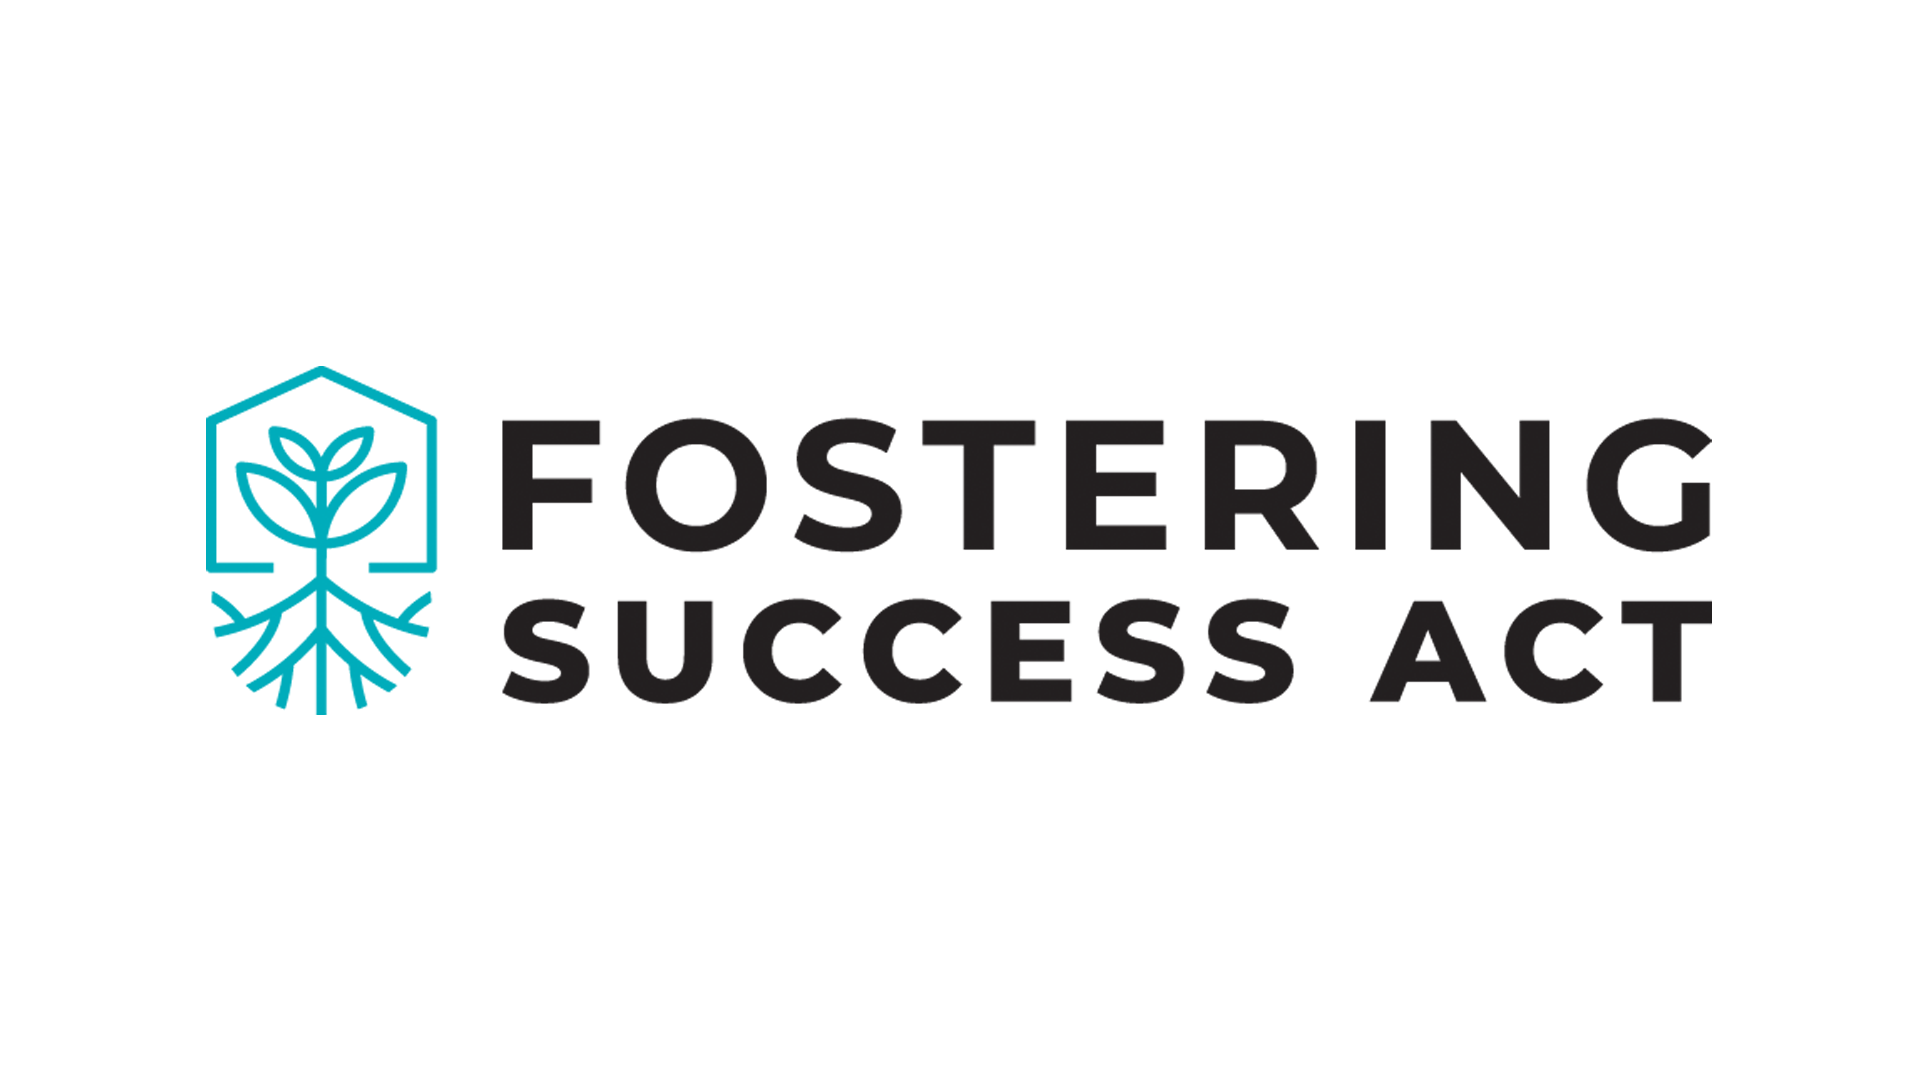 Rick Jackson Discusses Fostering Success Act, a Nonprofit Serving Youth Aging Out of Foster Care